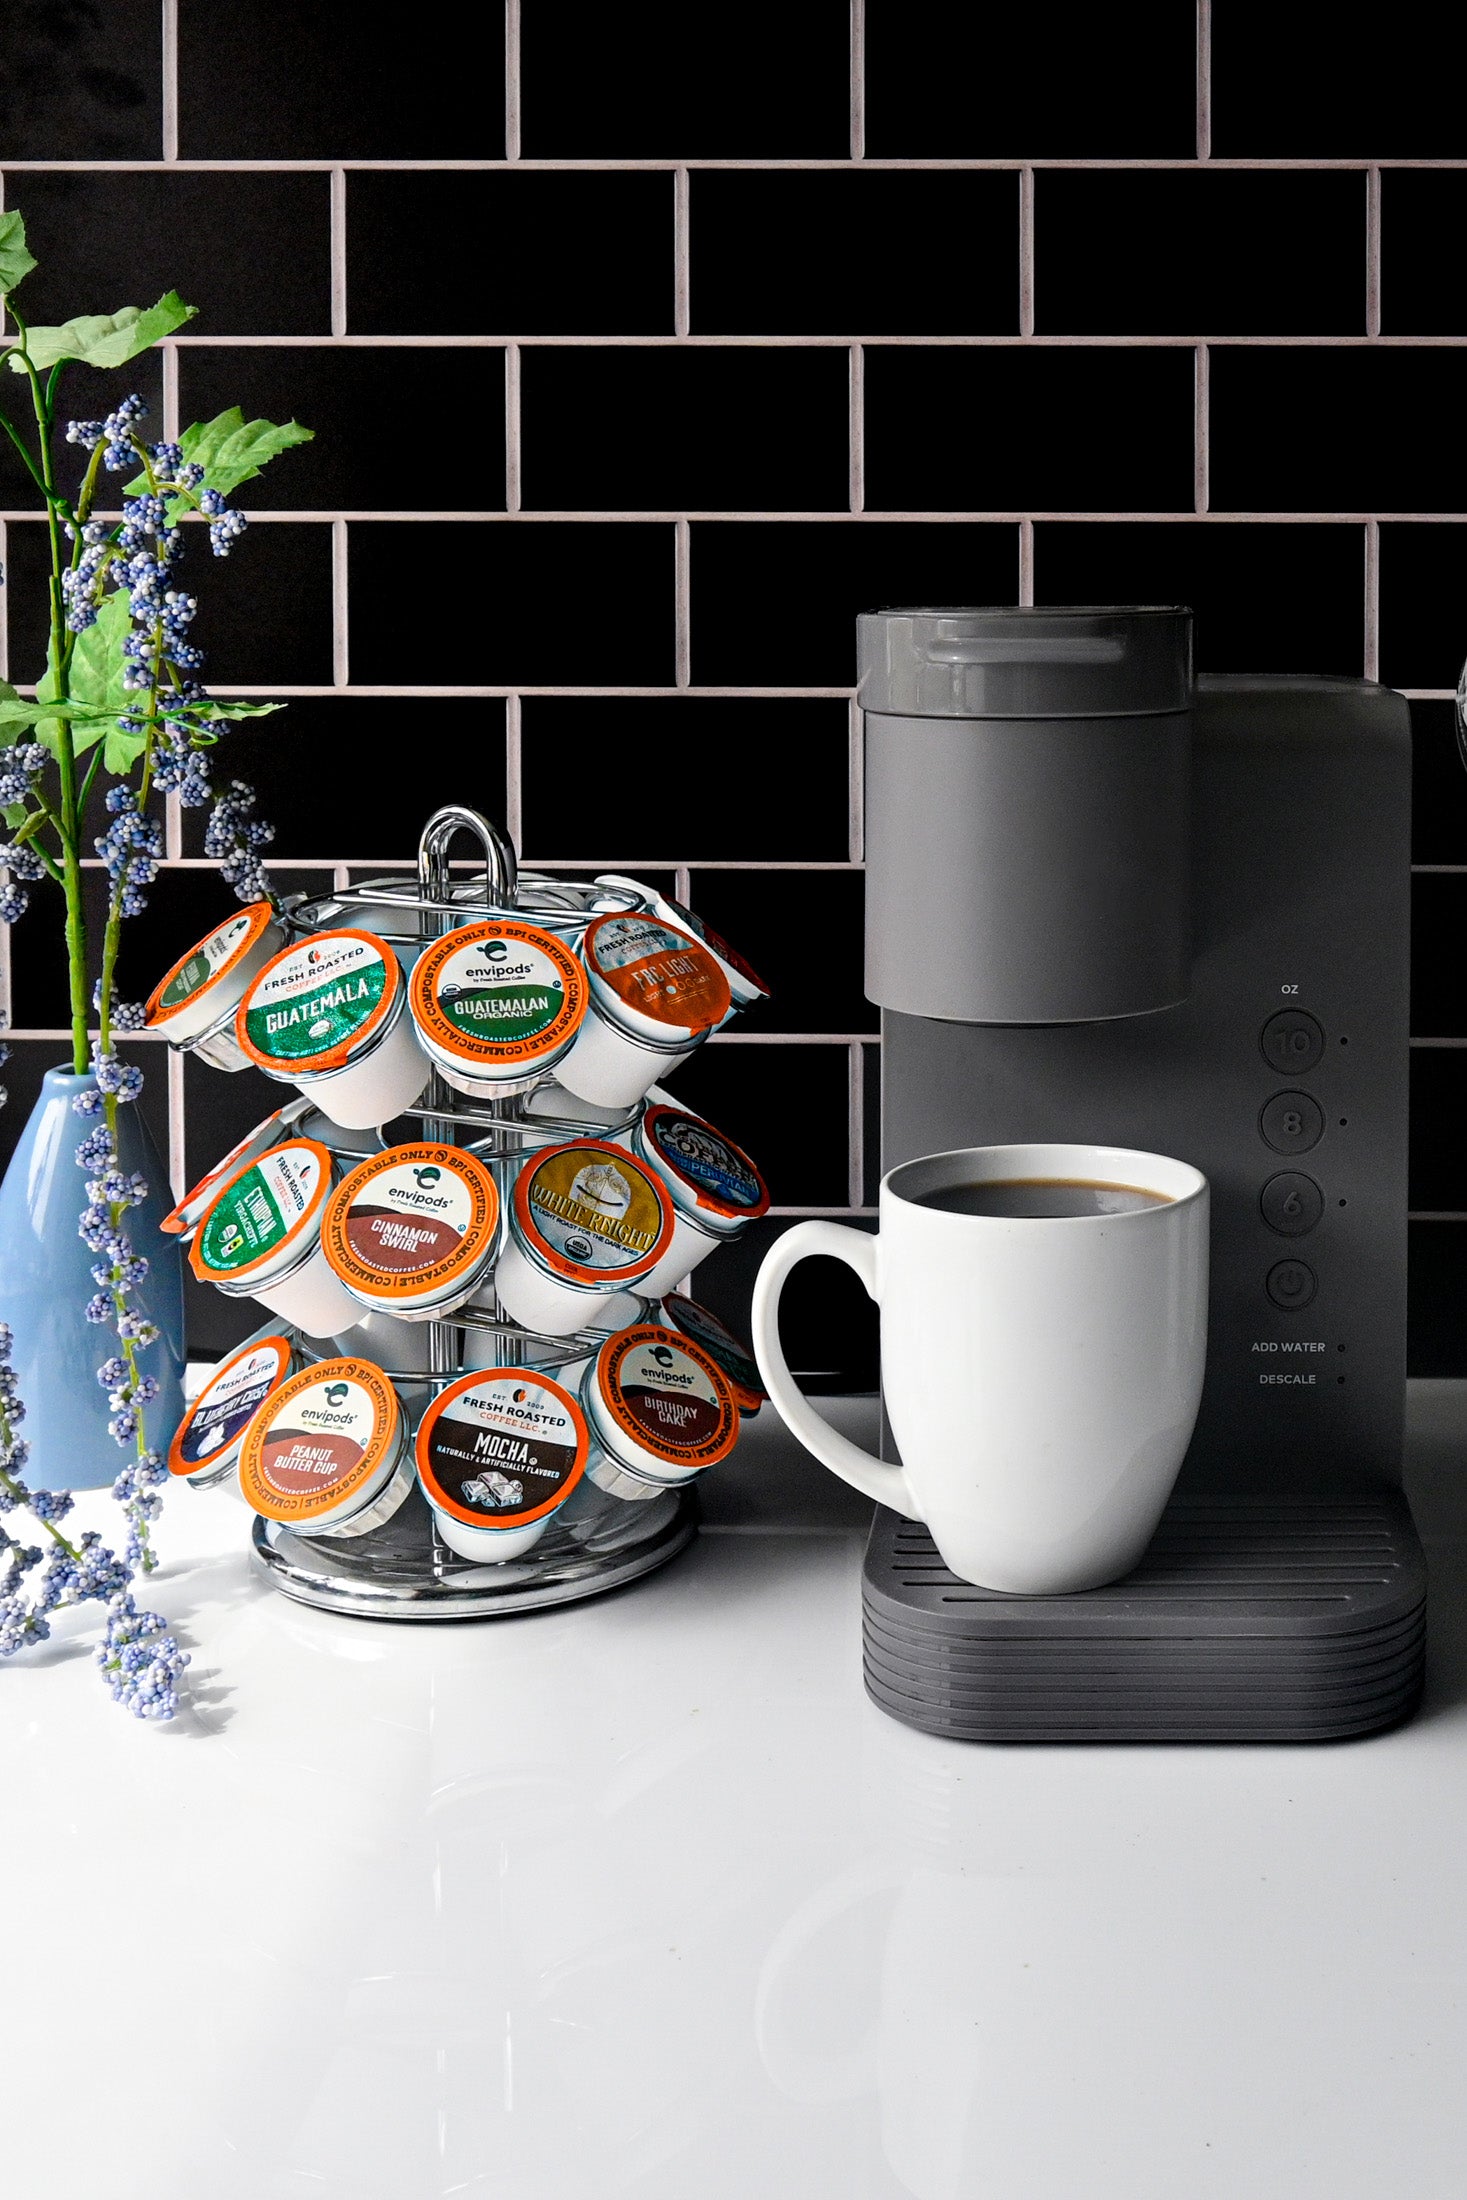 Image of coffee pod machine with cup of coffee.